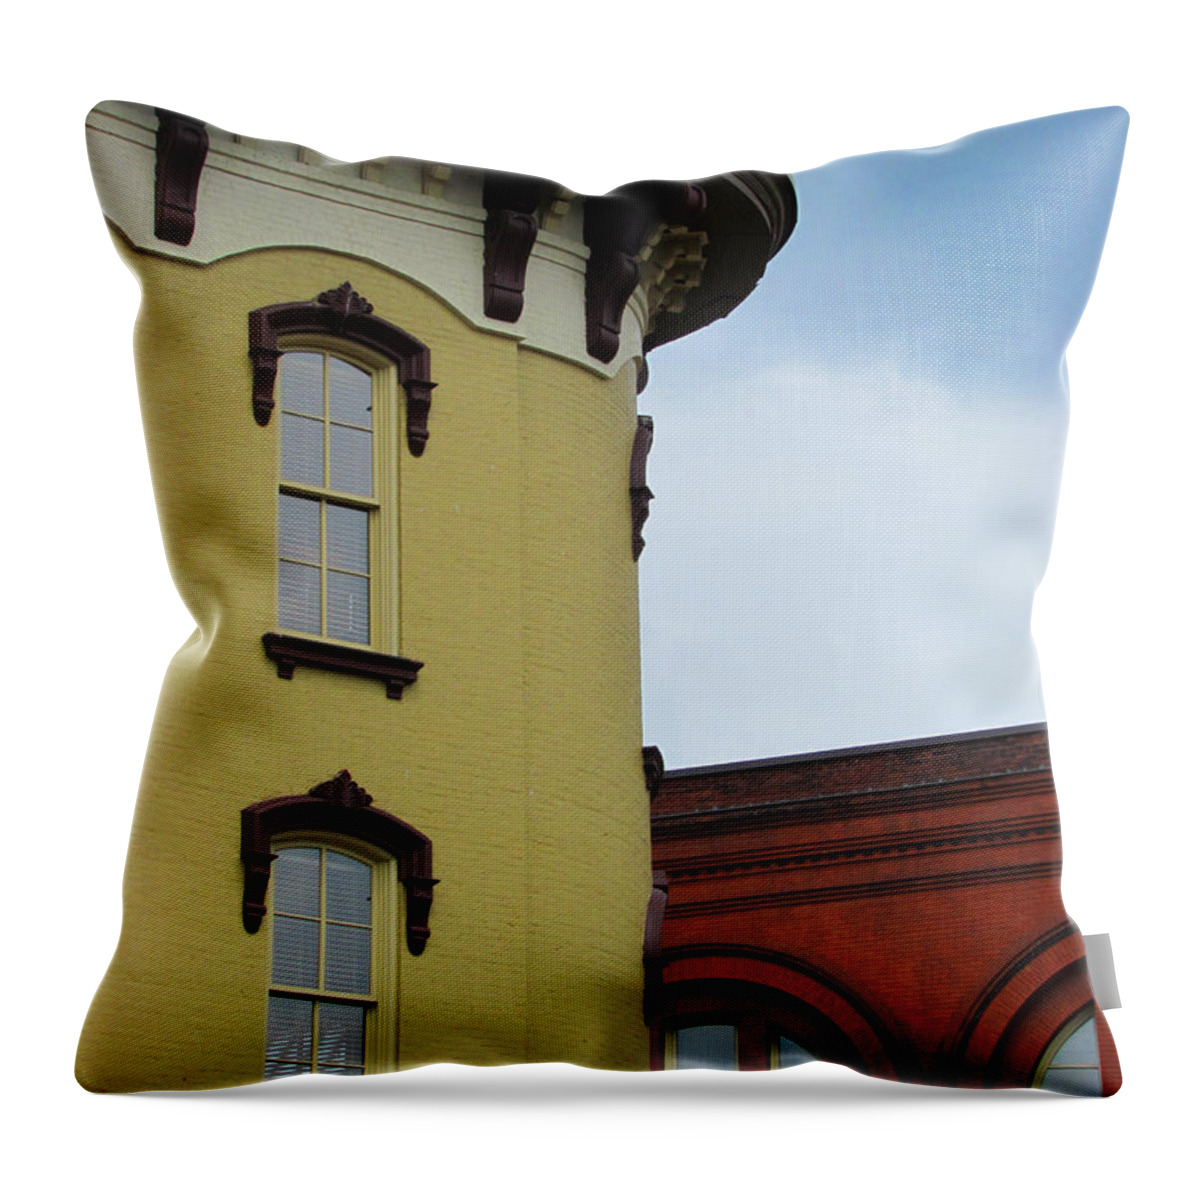 Grand Rapids Throw Pillow featuring the photograph Grand Rapids Downtown Architecture by David T Wilkinson